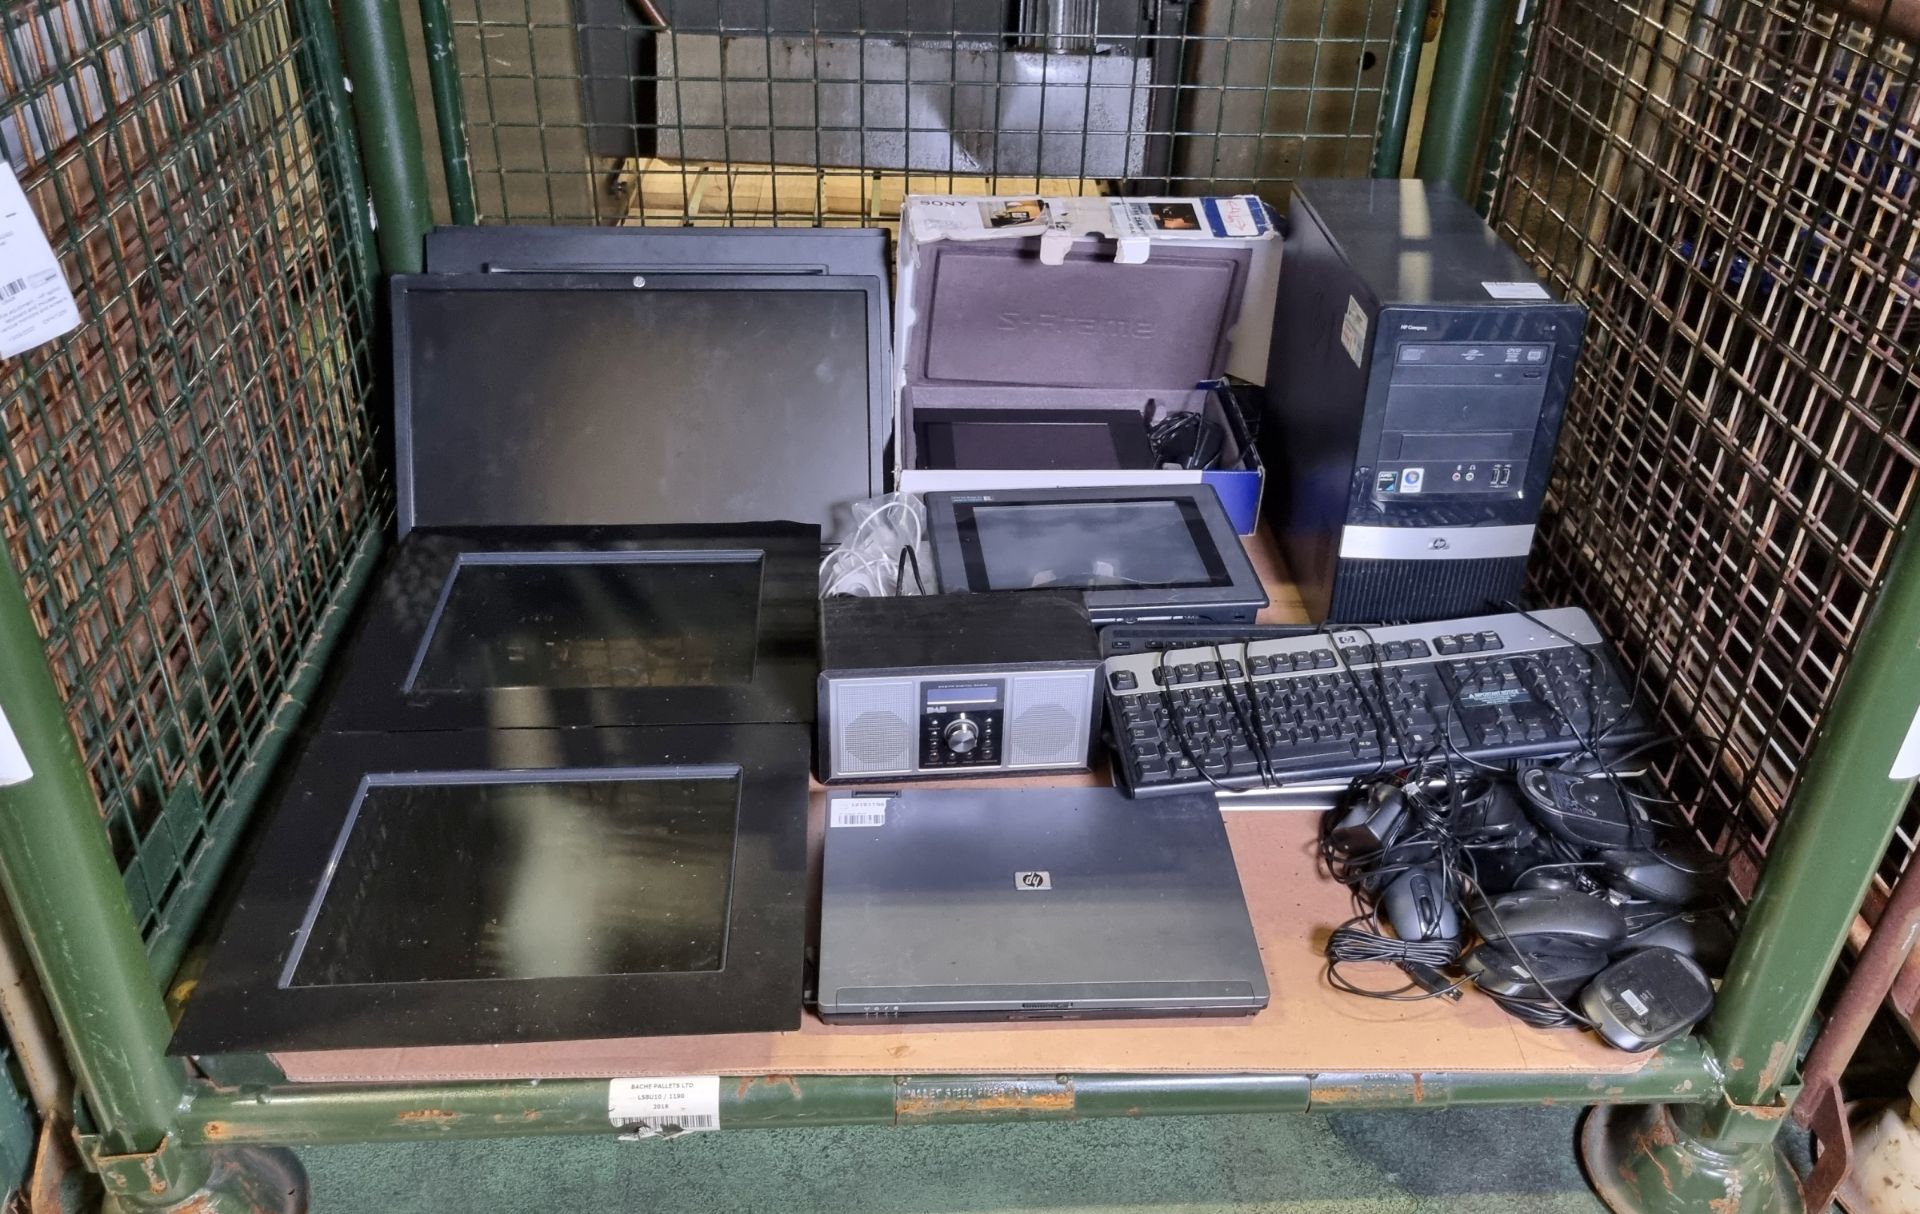 Office equipment - HP laptop, keyboard and mice, various monitors and screens, HP Compaq DX2450